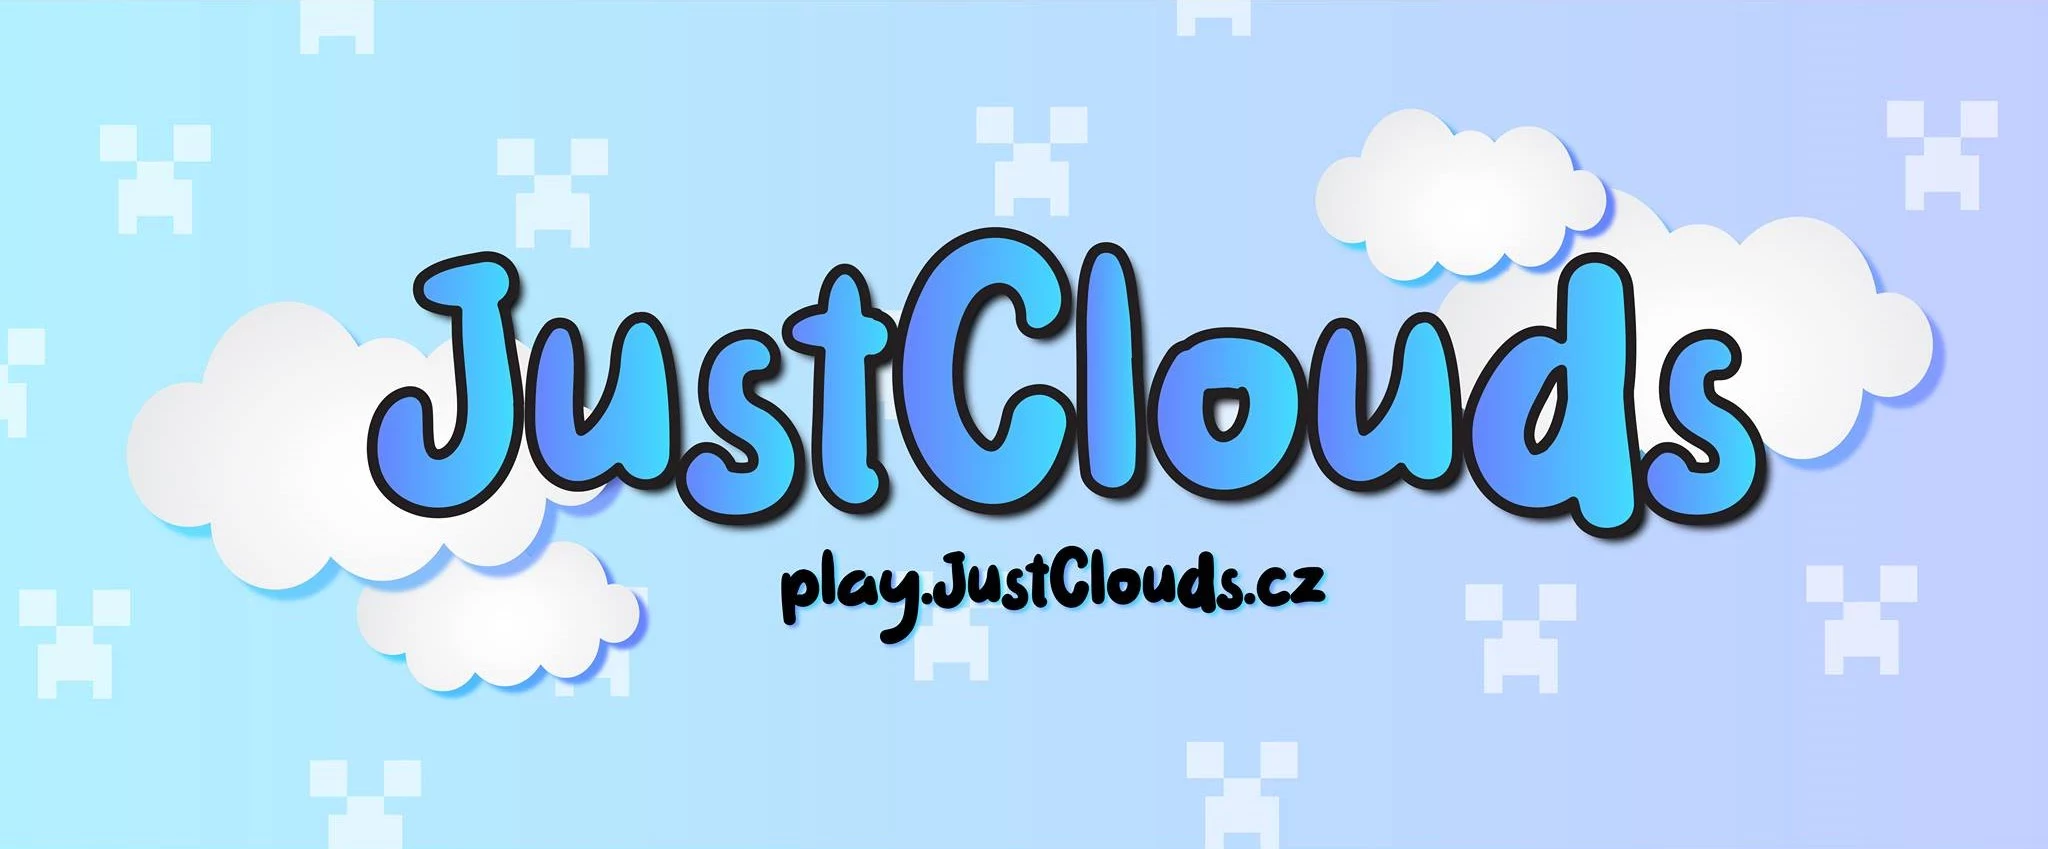 JustClouds.cz_background